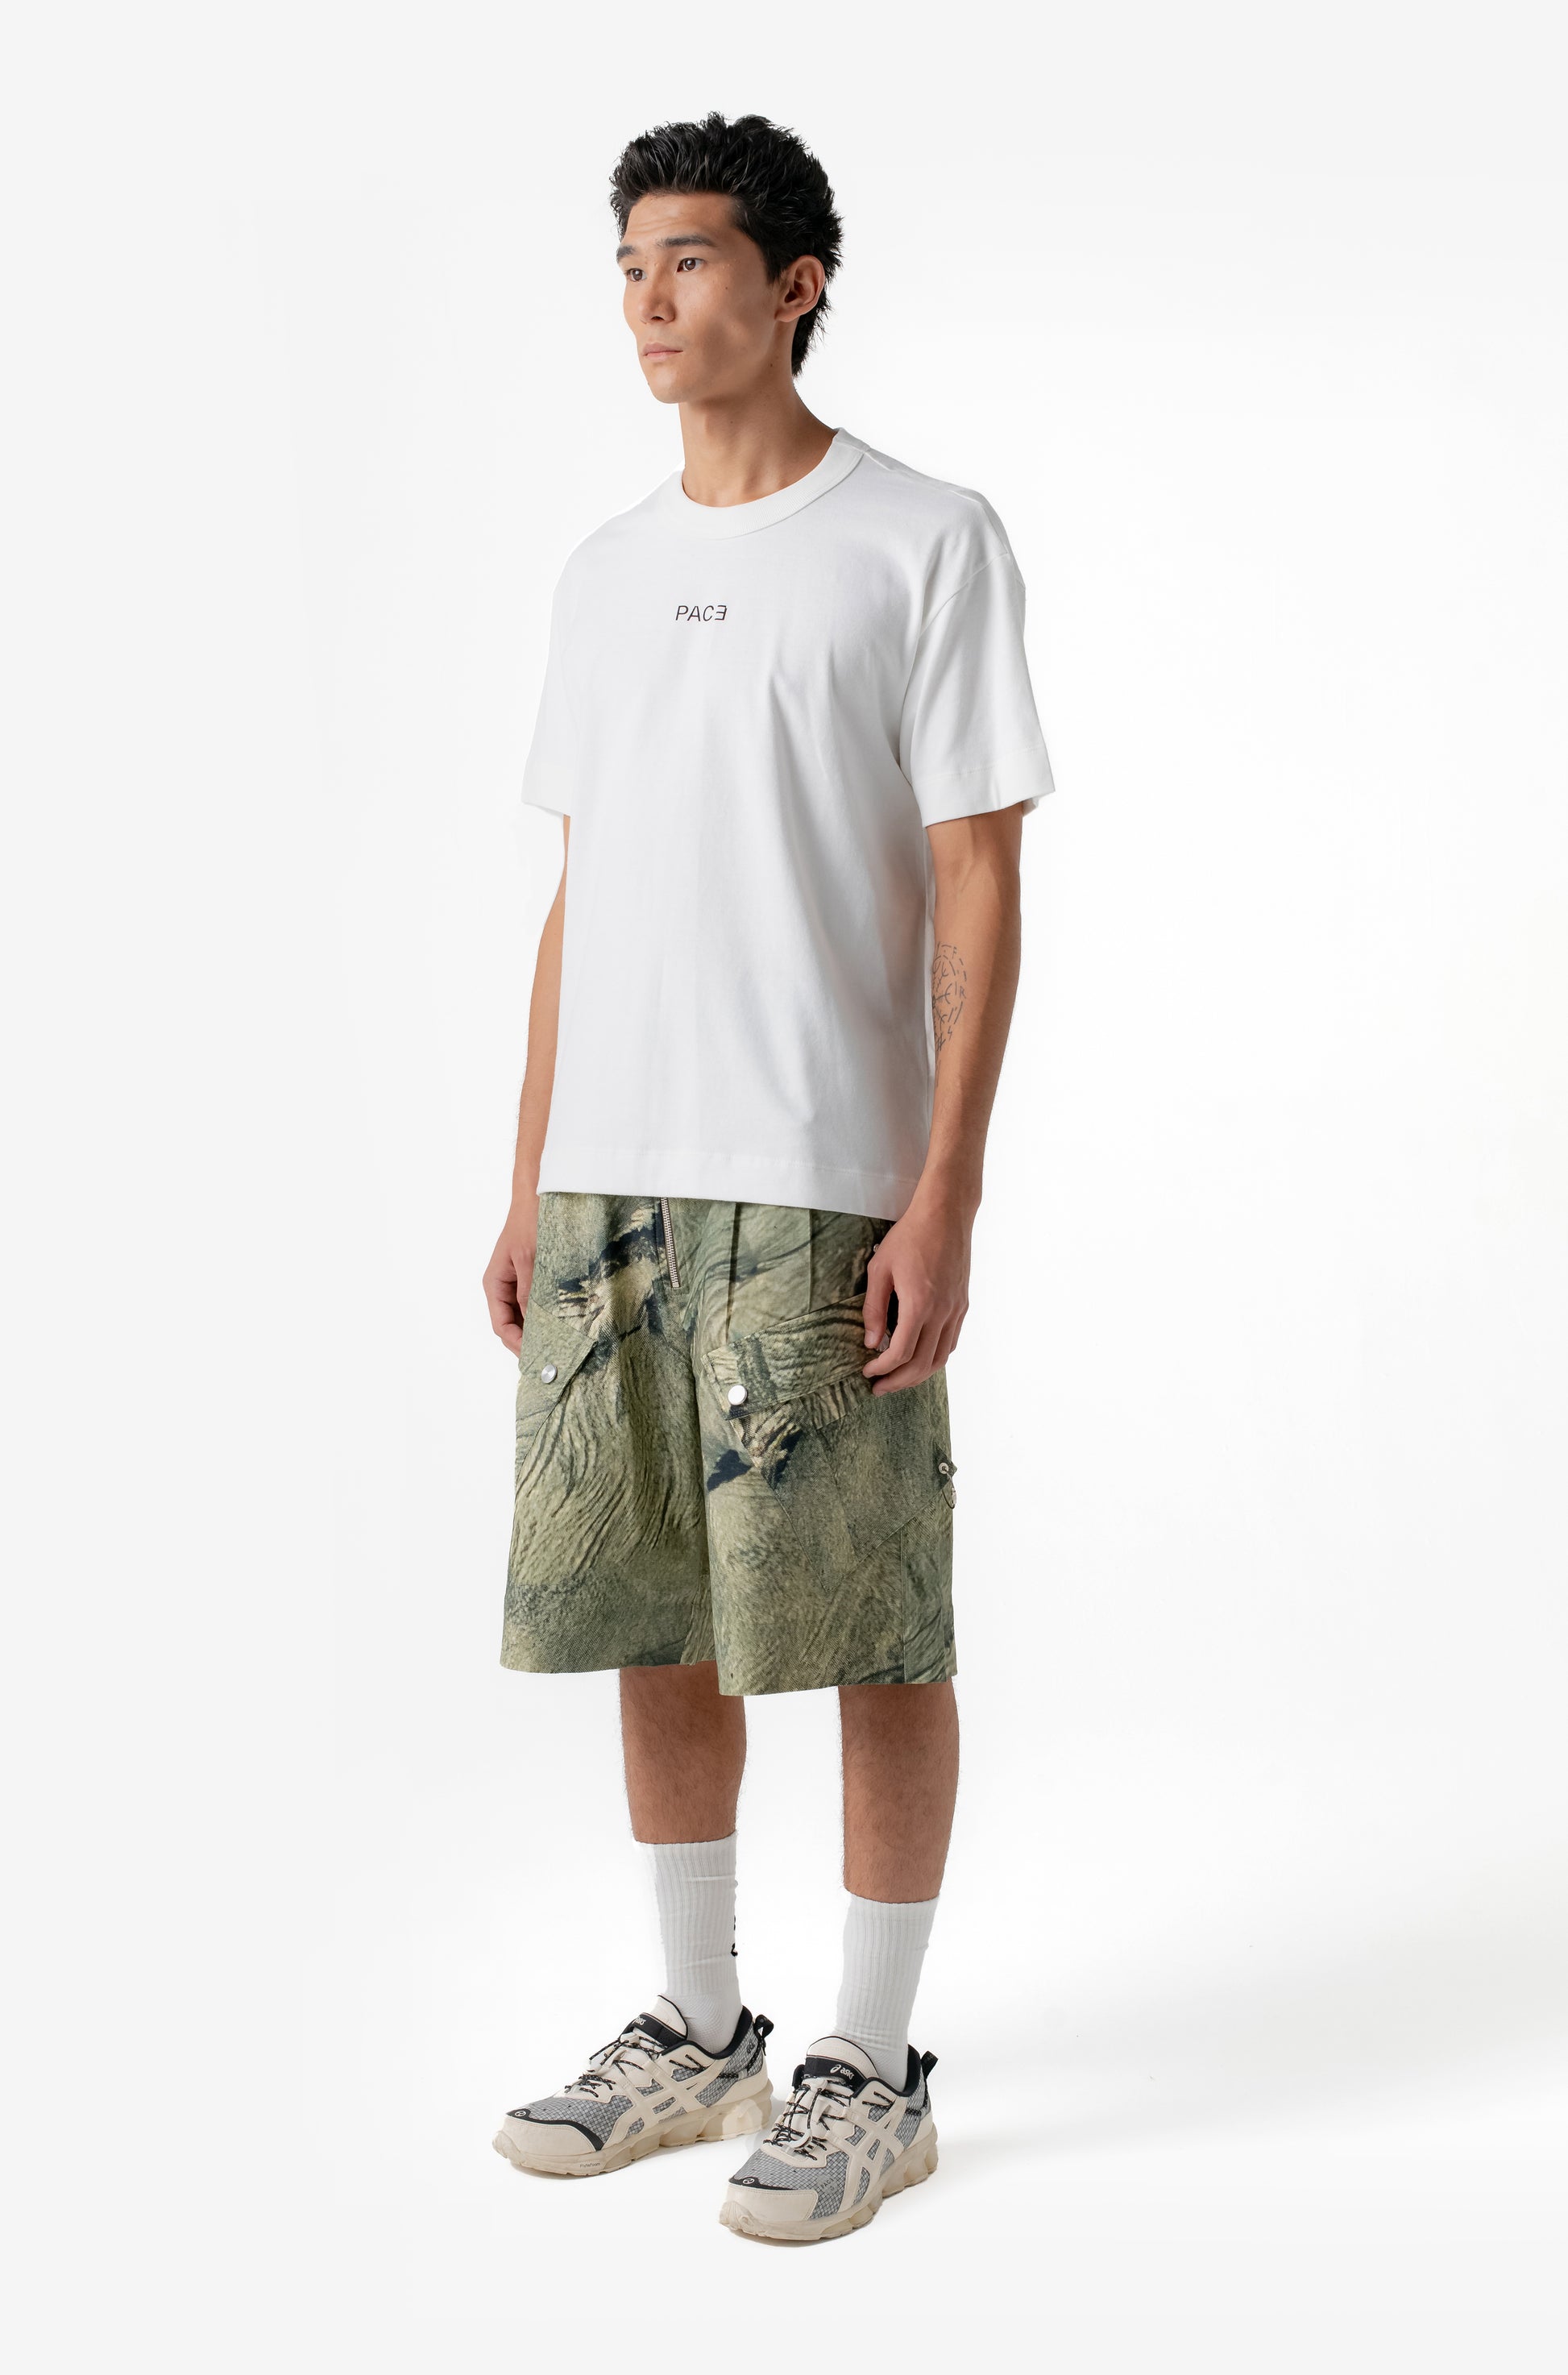 PACE - Ambiguidade Regular Tee "Off White" - THE GAME